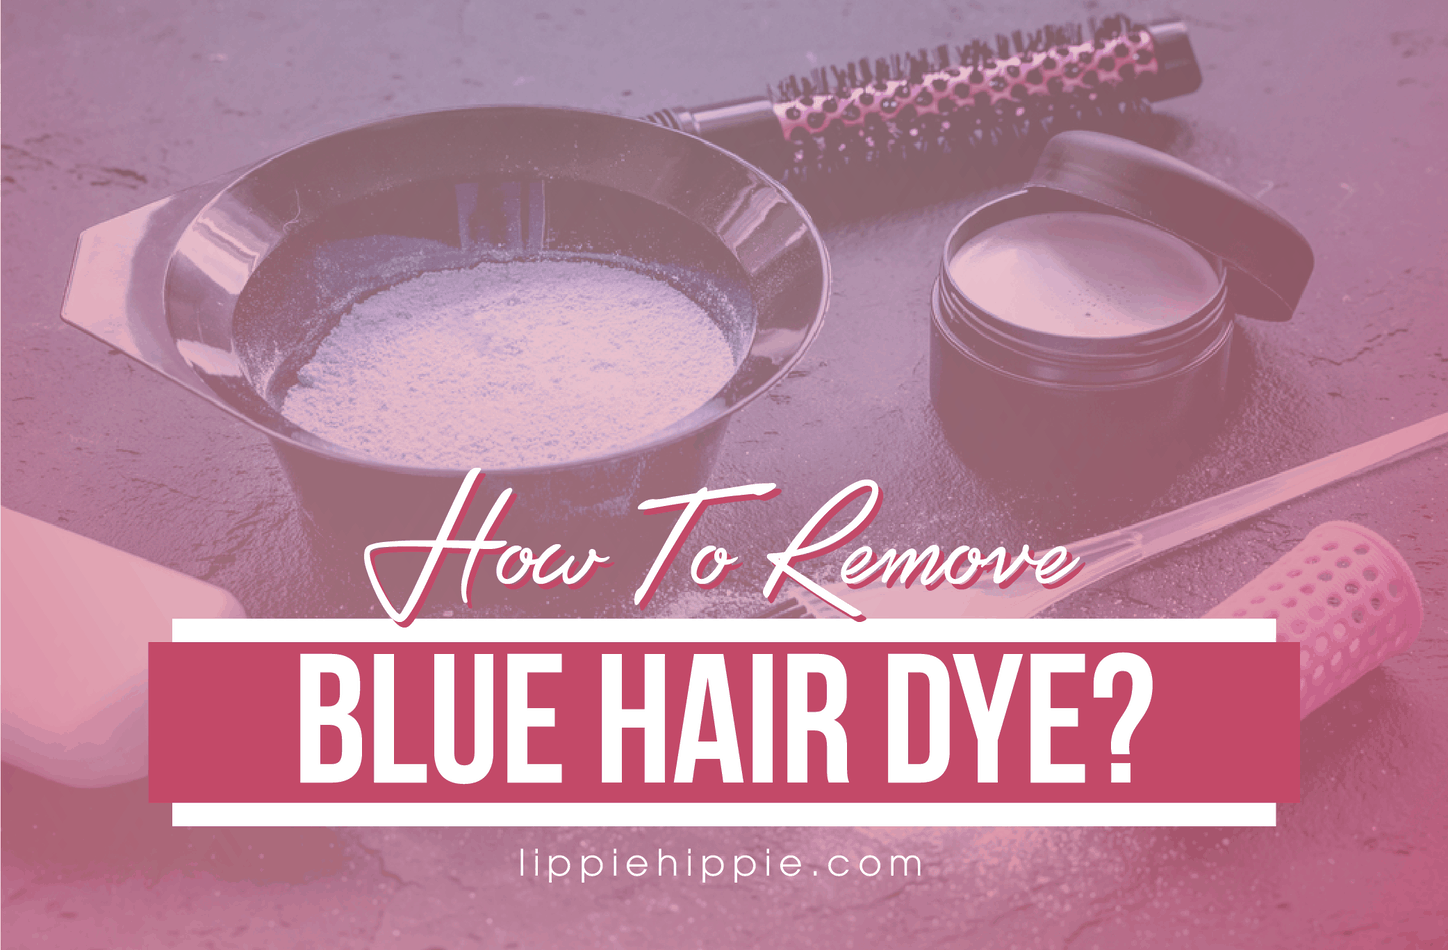 9. "The Science of Removing Blue Hair Dye: Tips and Tricks for a Safe and Effective Process" - wide 6